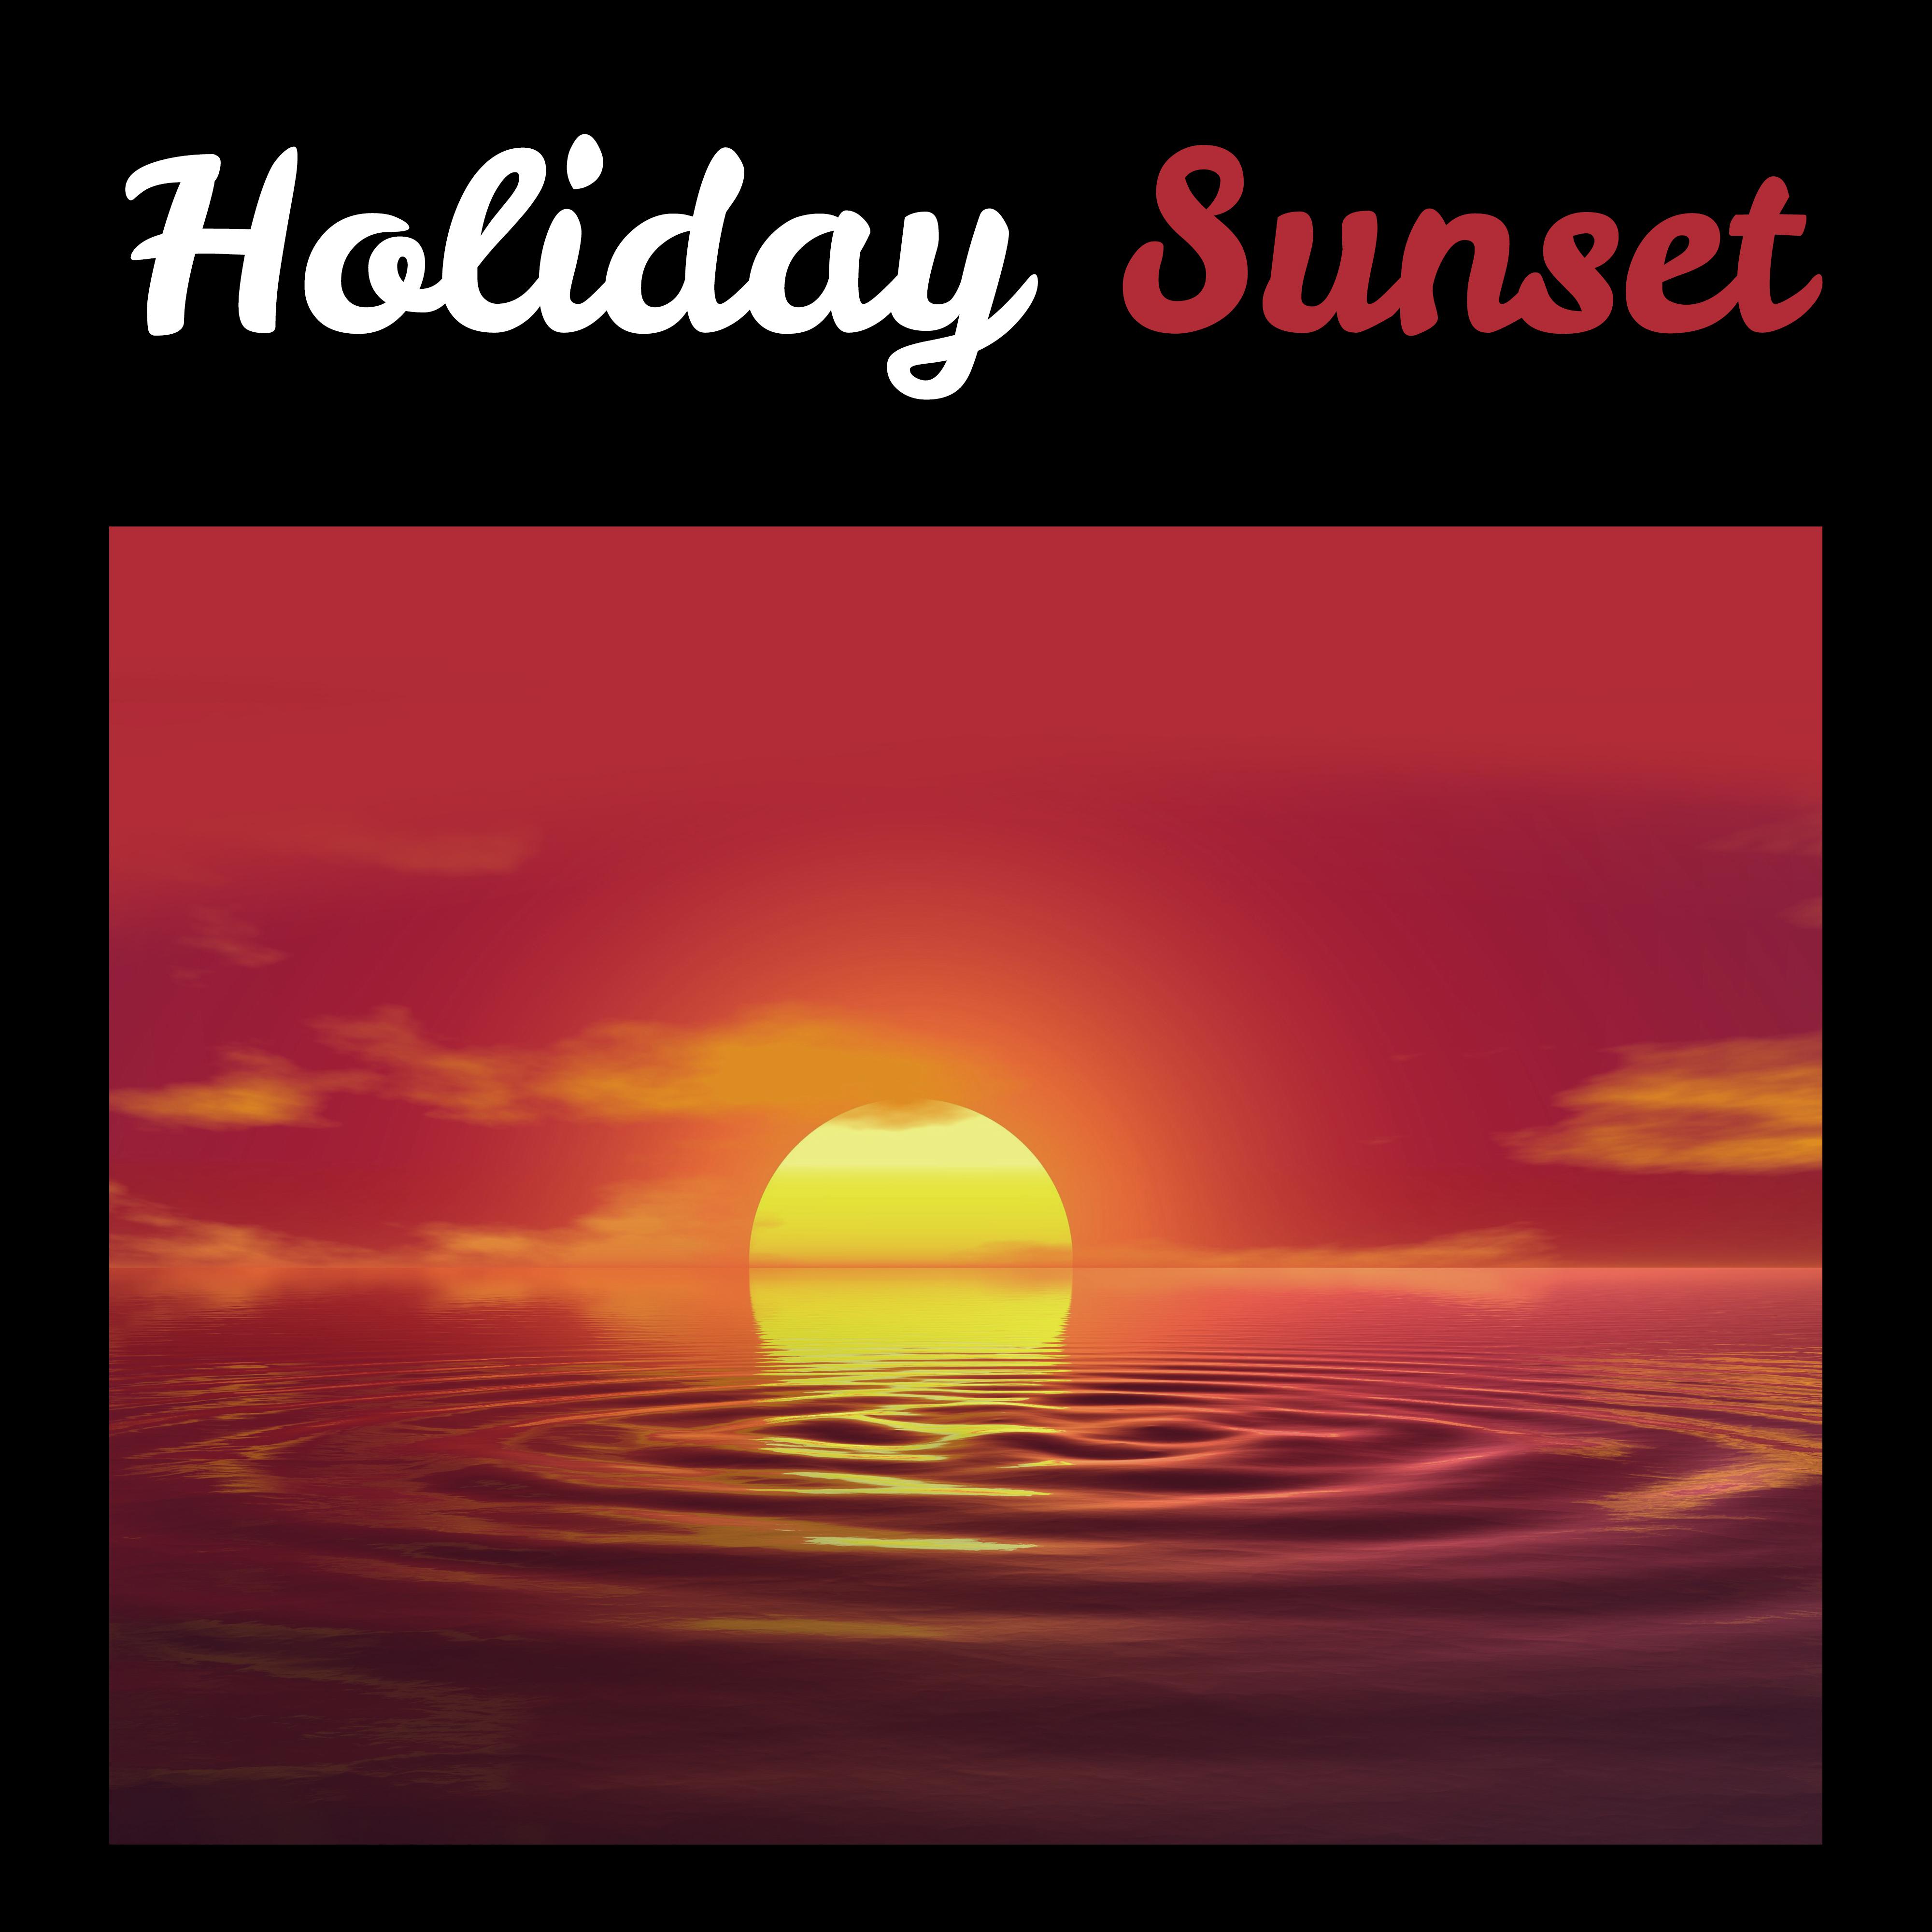 Holiday Sunset – Best Chillout Music, Sensual Sounds, Chill Out 2016, Holiday Songs, Summer Chill, Relax on Riviera, Deep Sun